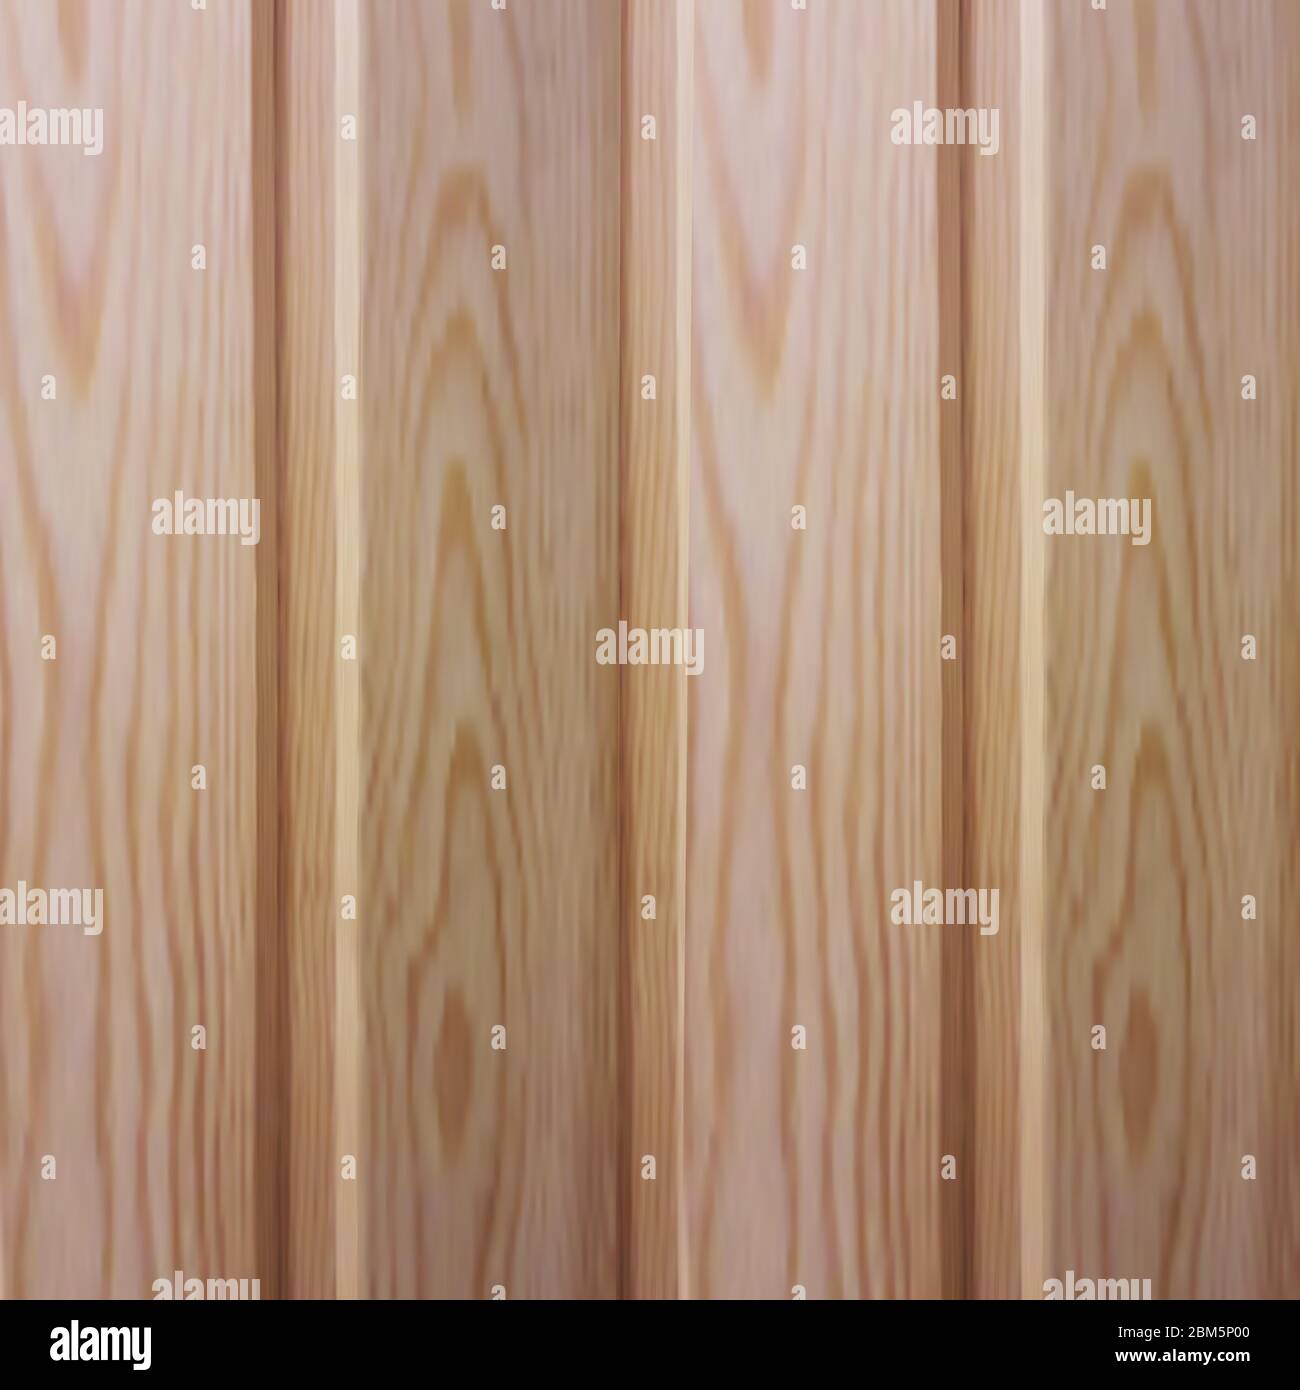 Vector realistic texture of a wooden lining with chamfers and indentations.Wooden pine vertical dice.Background with a wooden structure in the style Stock Vector